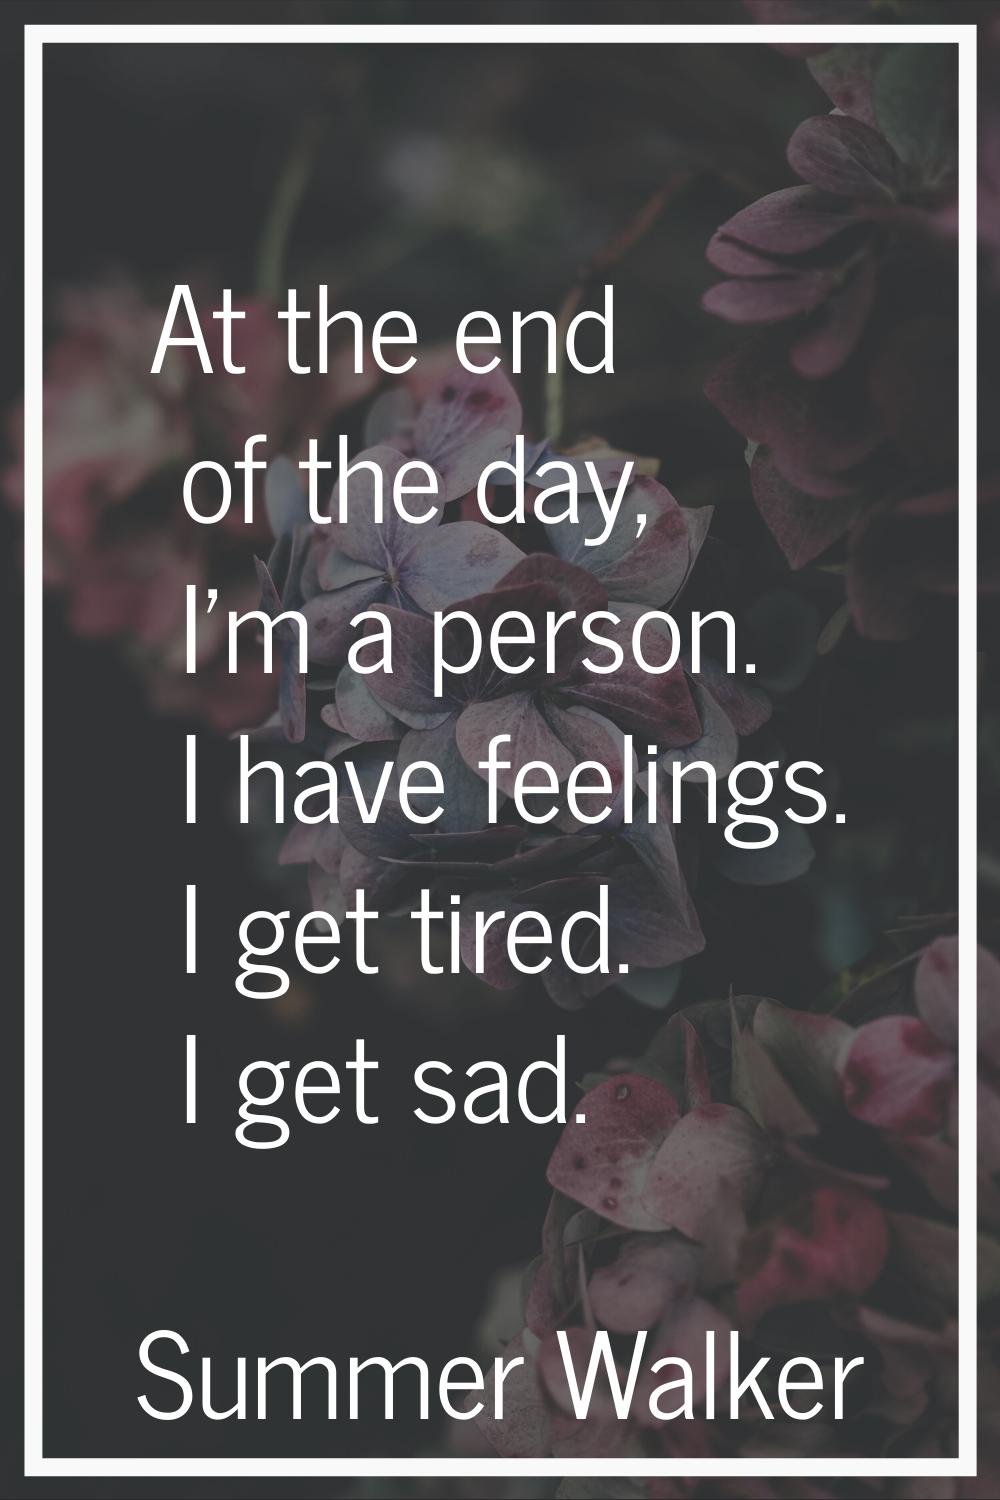 At the end of the day, I'm a person. I have feelings. I get tired. I get sad.